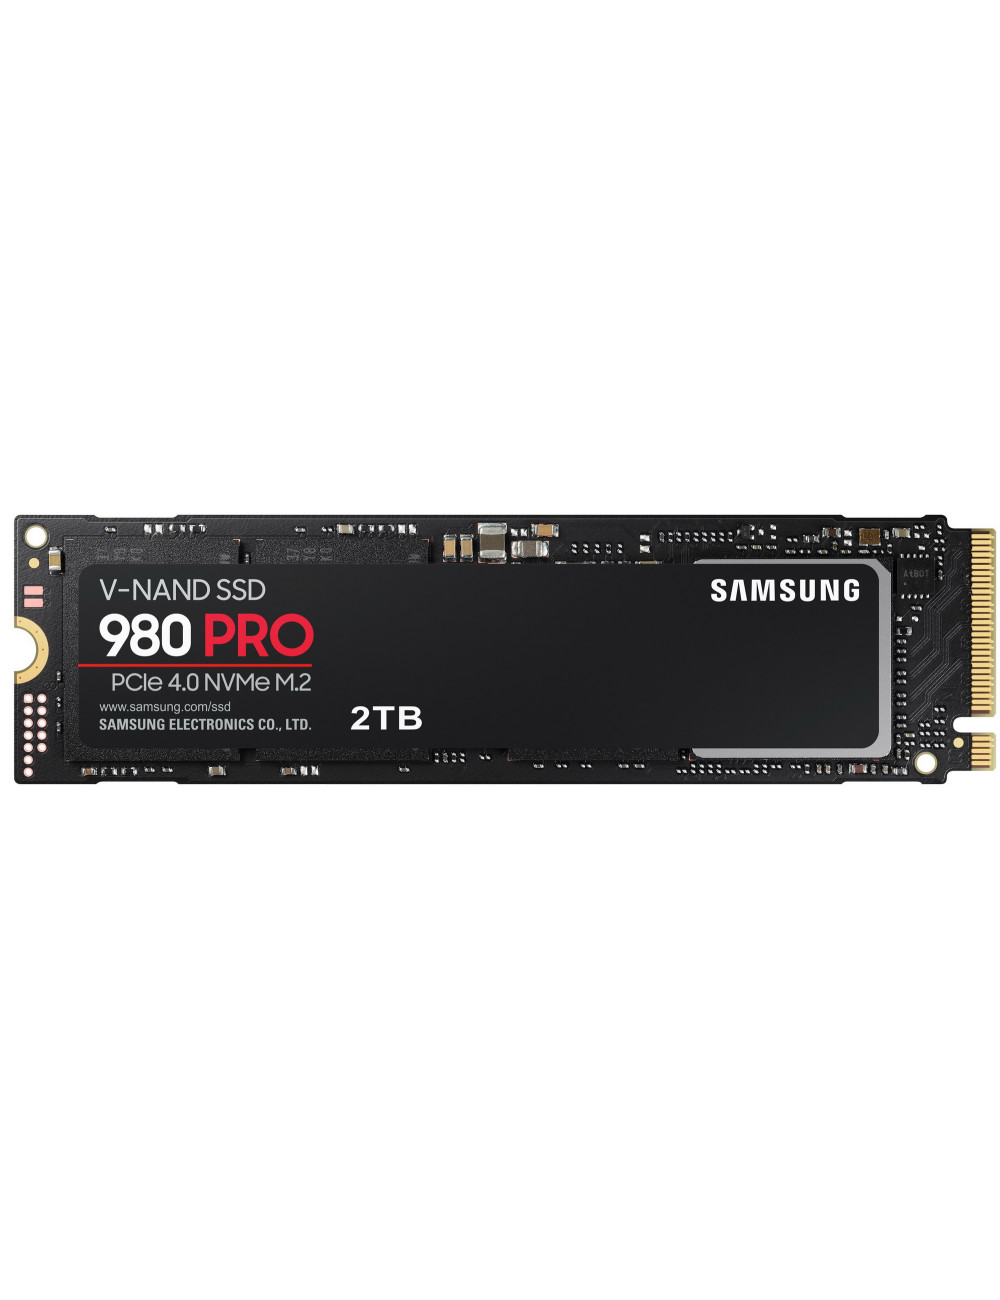 Samsung | 980 PRO | 2000 GB | SSD interface M.2 NVME | Read speed 7000 MB/s | Write speed 5100 MB/s